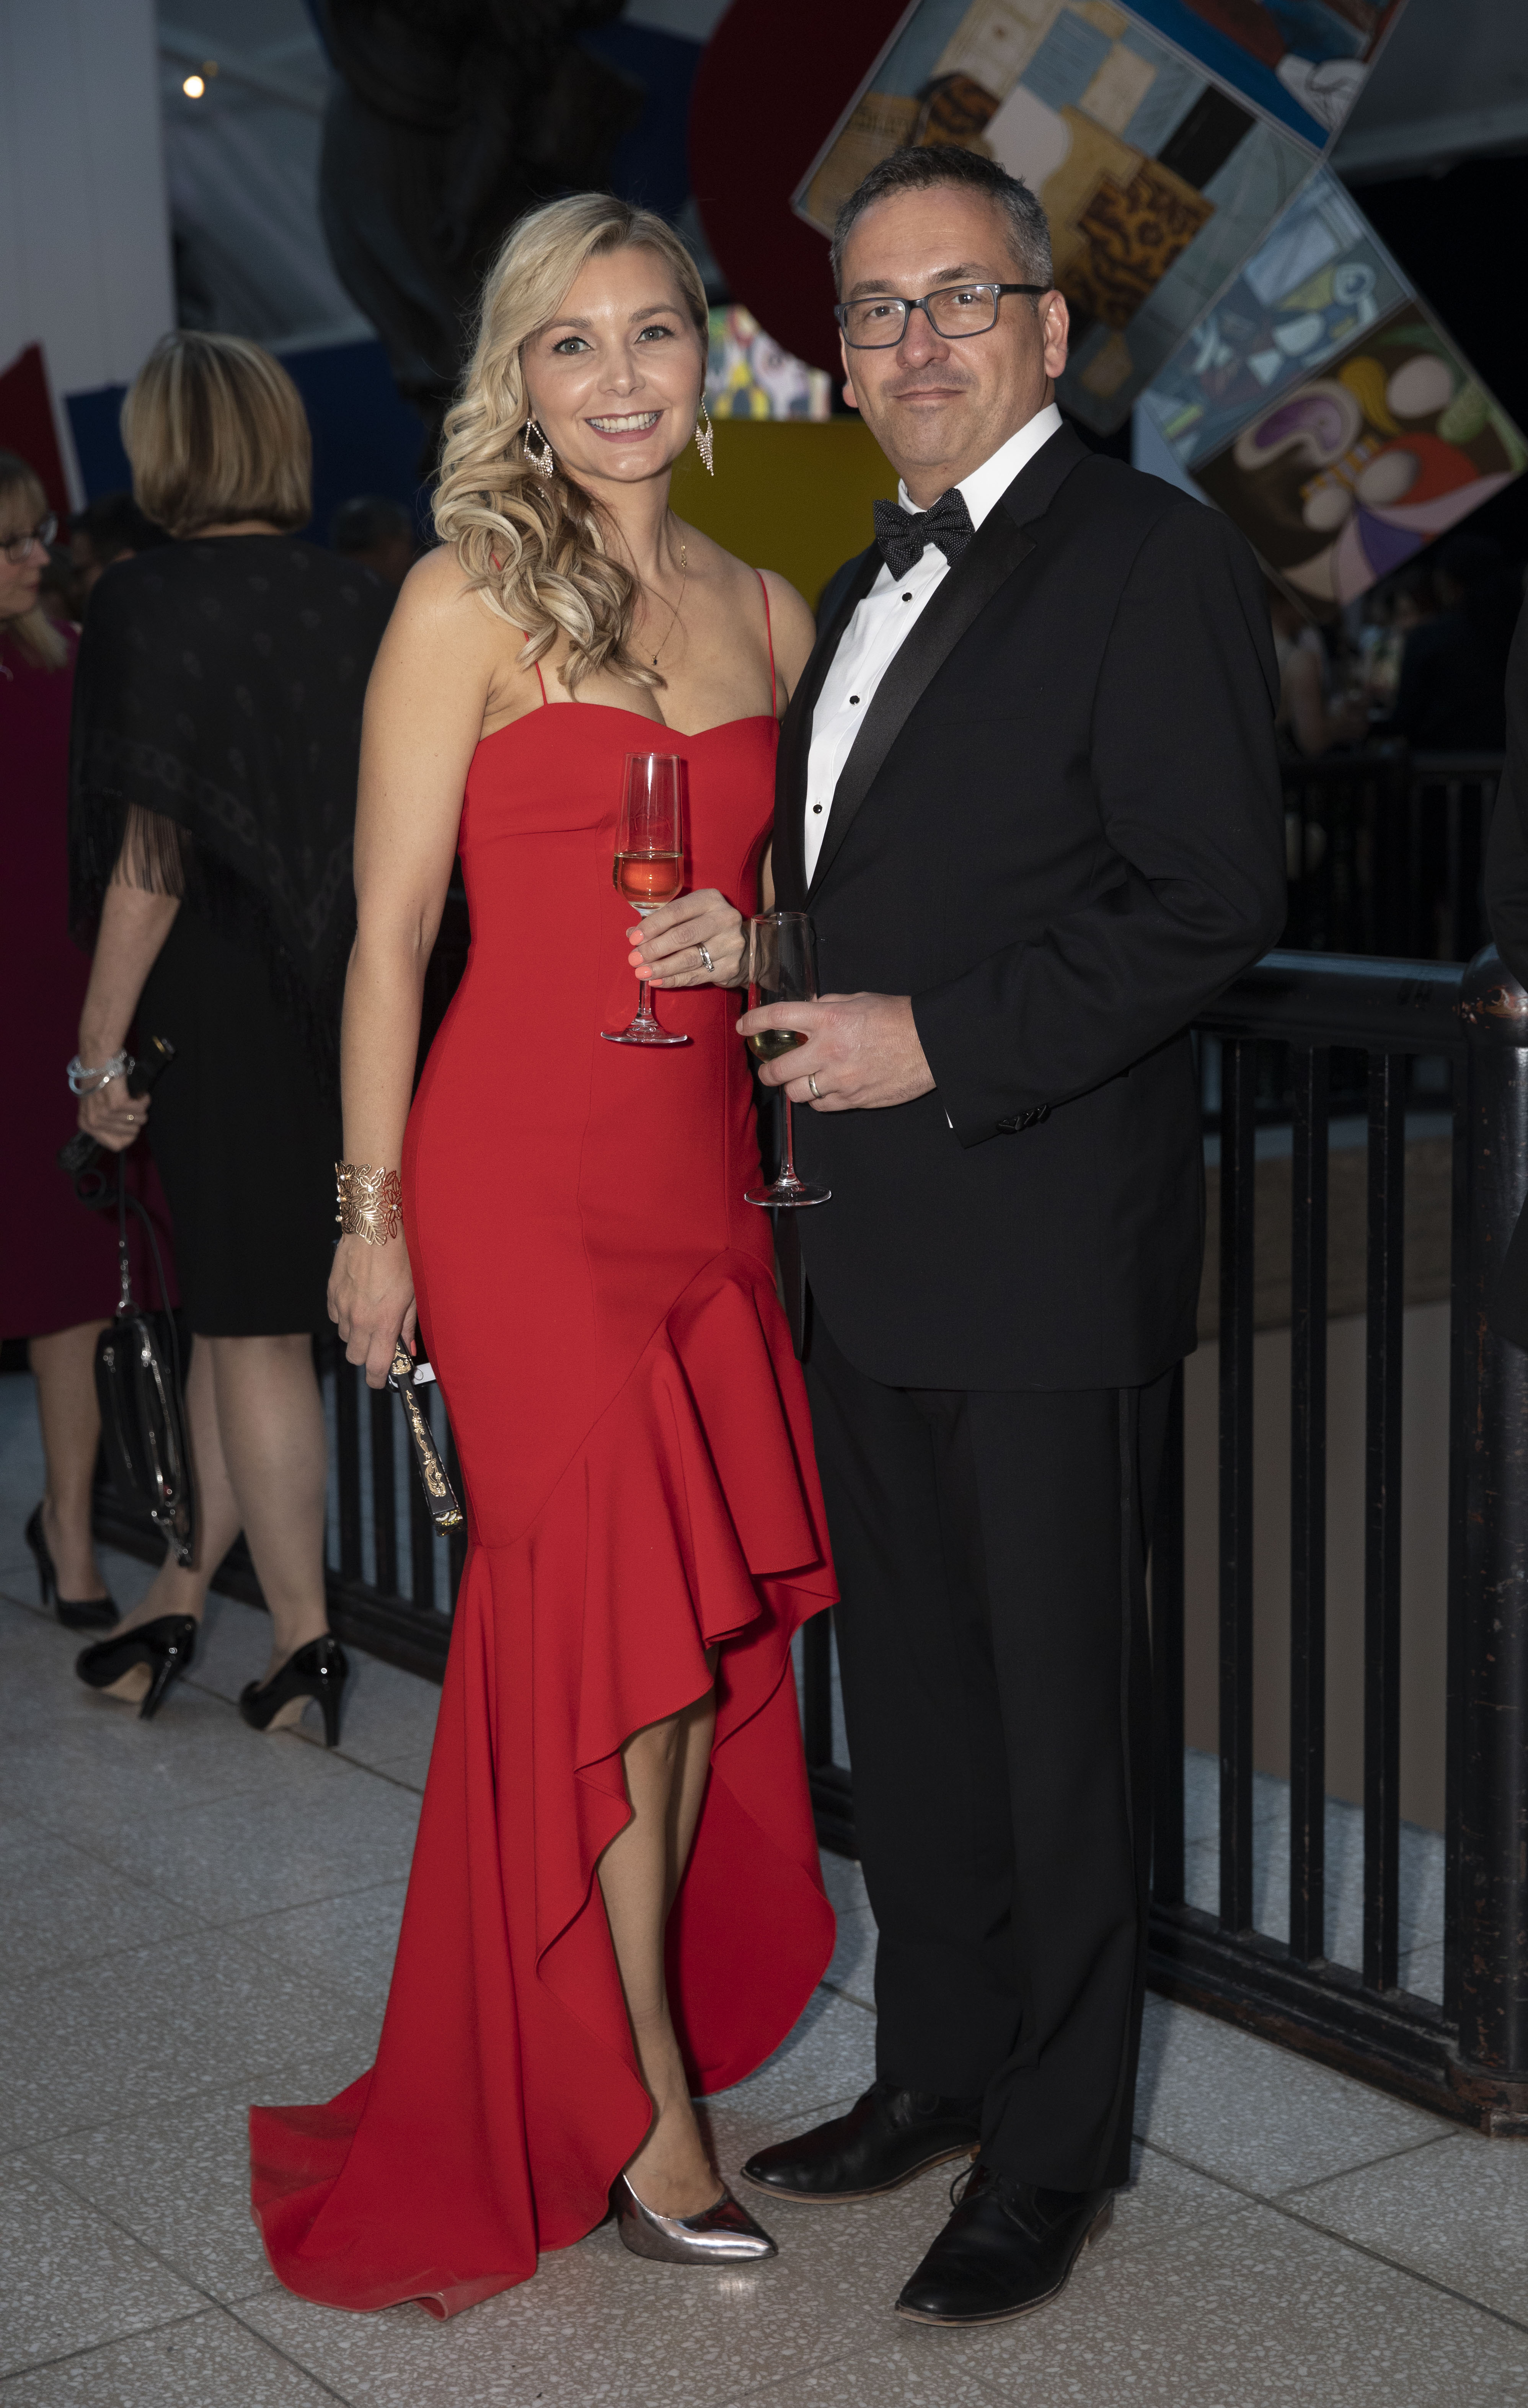 MONTREAL, QUE.: April 25, 2019-- Martine Tremblay & Alain Dussault at the 2019 Daffodil Ball in Montreal on Thursday April 25, 2019. © Allen McInnis 2019 No third party usage is permitted without prior consent. amcinnis@mcinnis.ca © Allen McInnis 2019